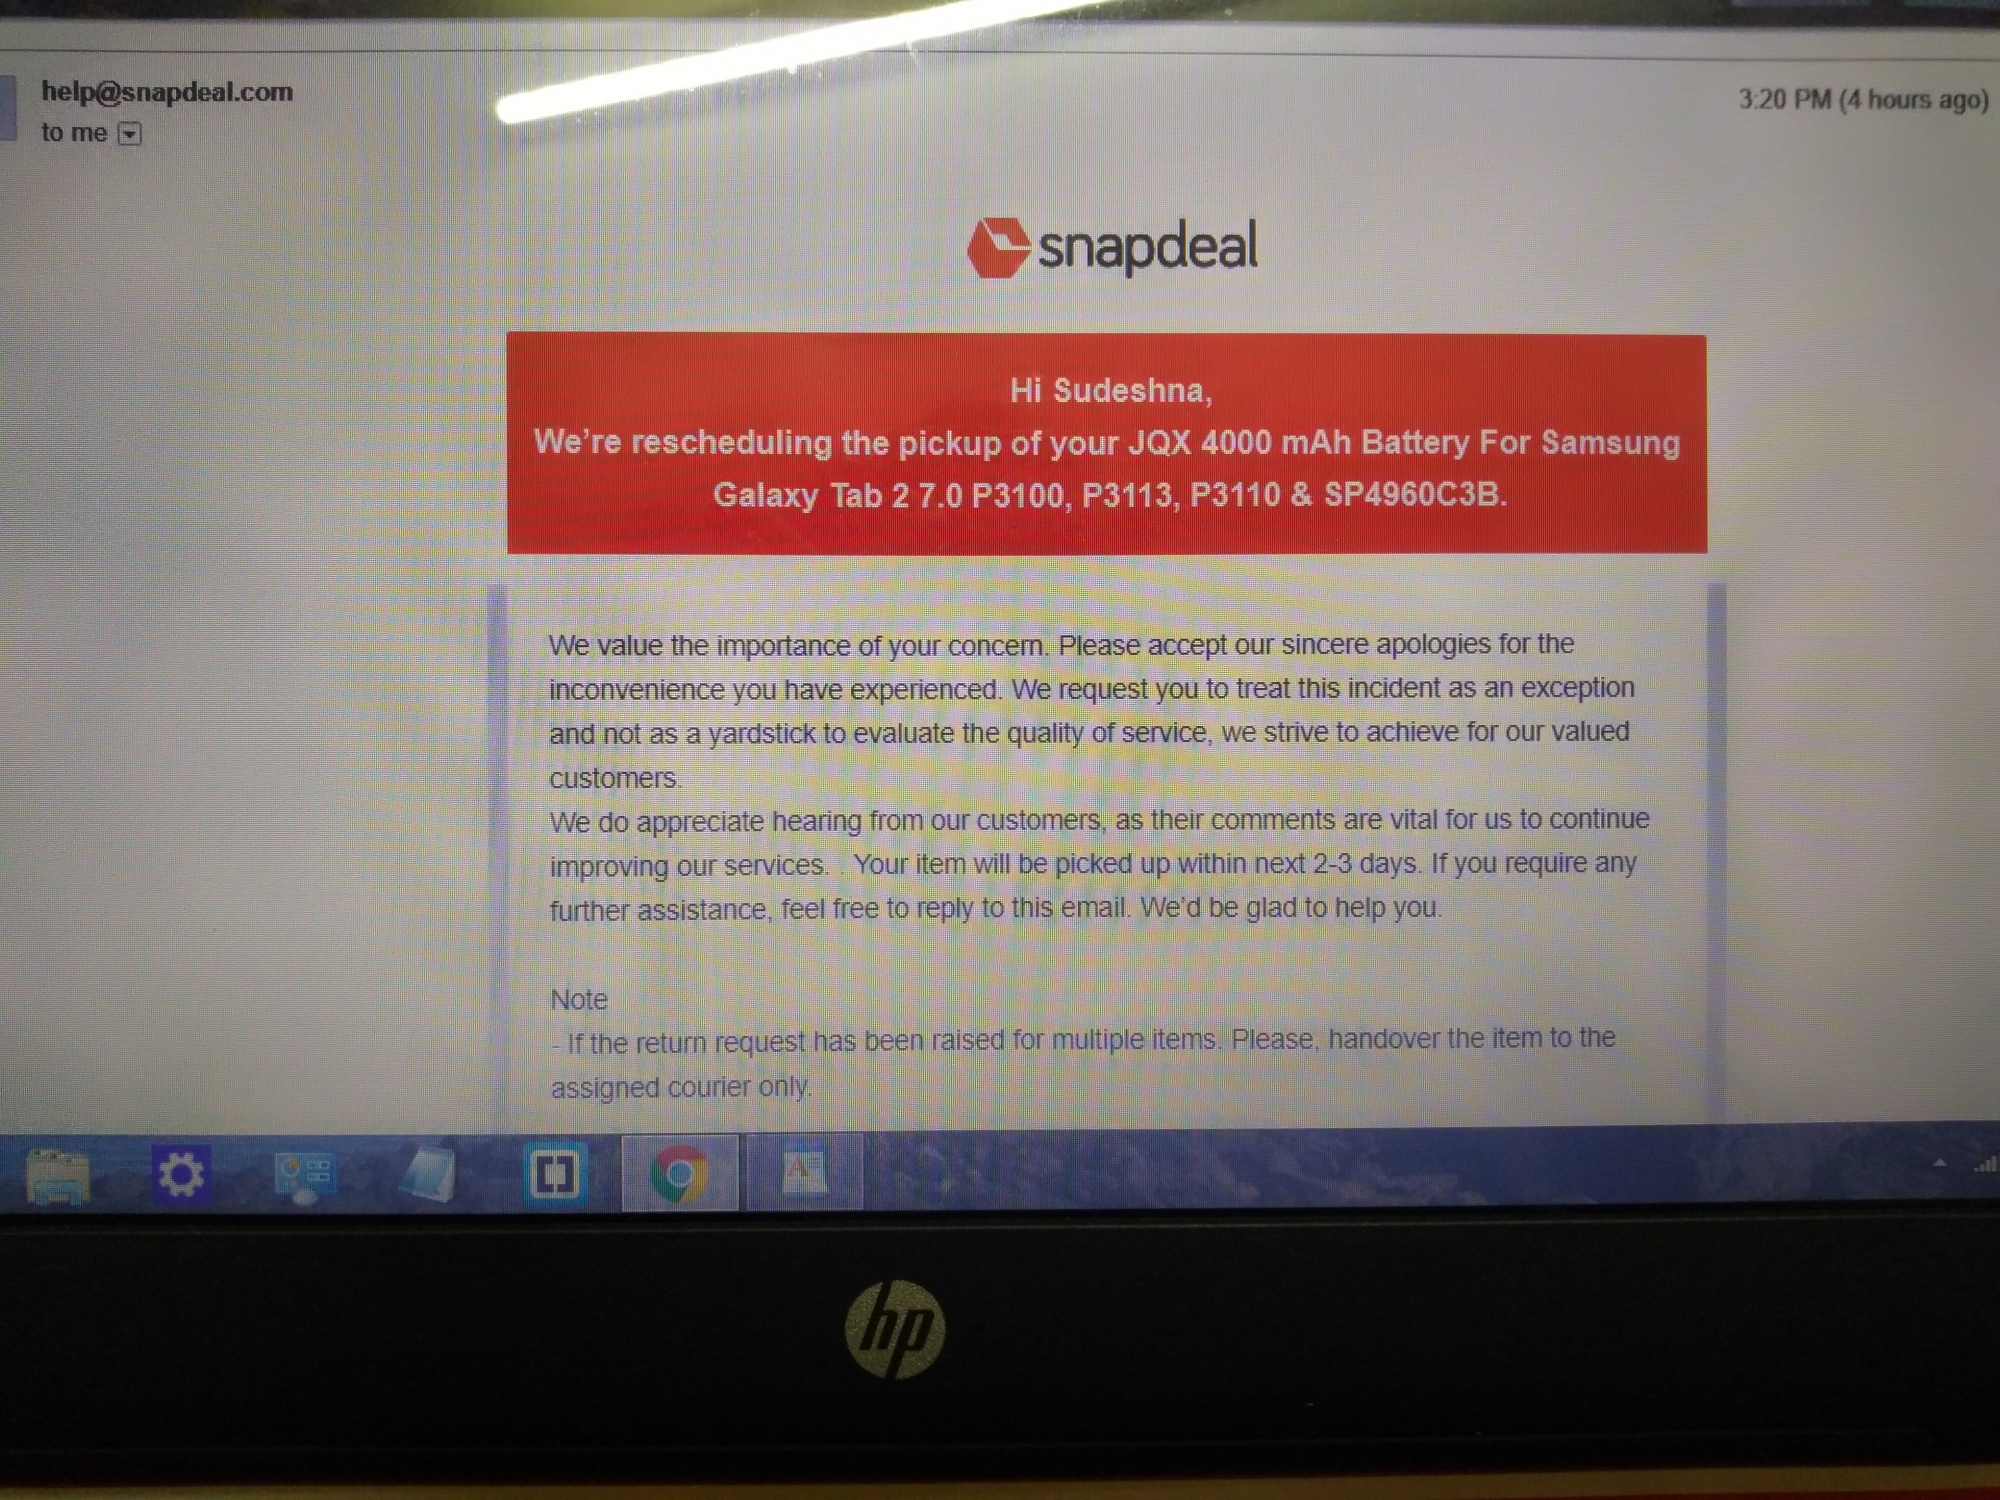 Snapdeal action